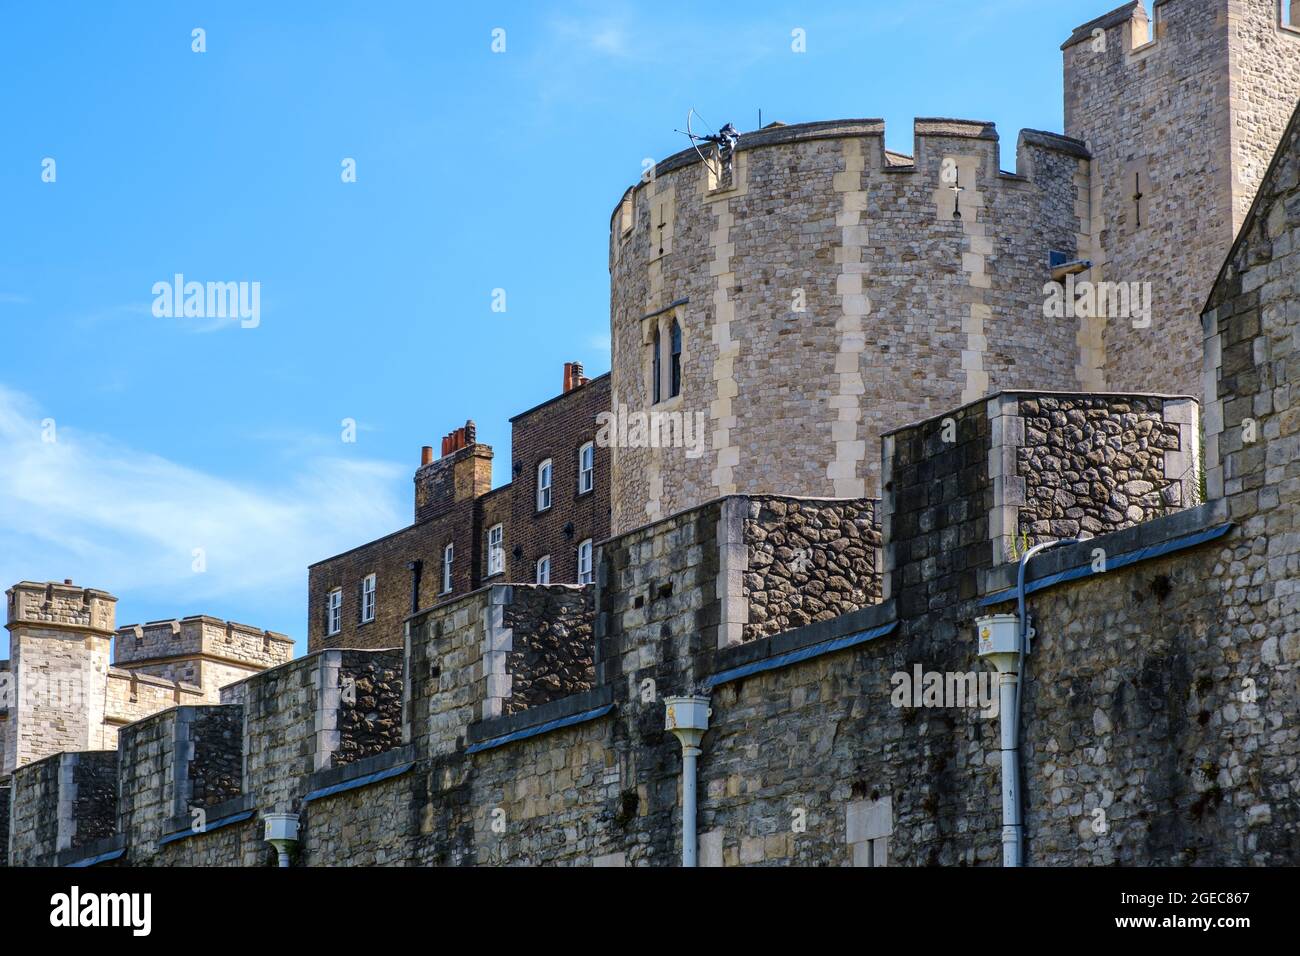 Staycation idea. Beauchamp Tower, west side of the Tower of London Complex, part of the brick & stone defensive inner wall to the Tower of London. Stock Photo